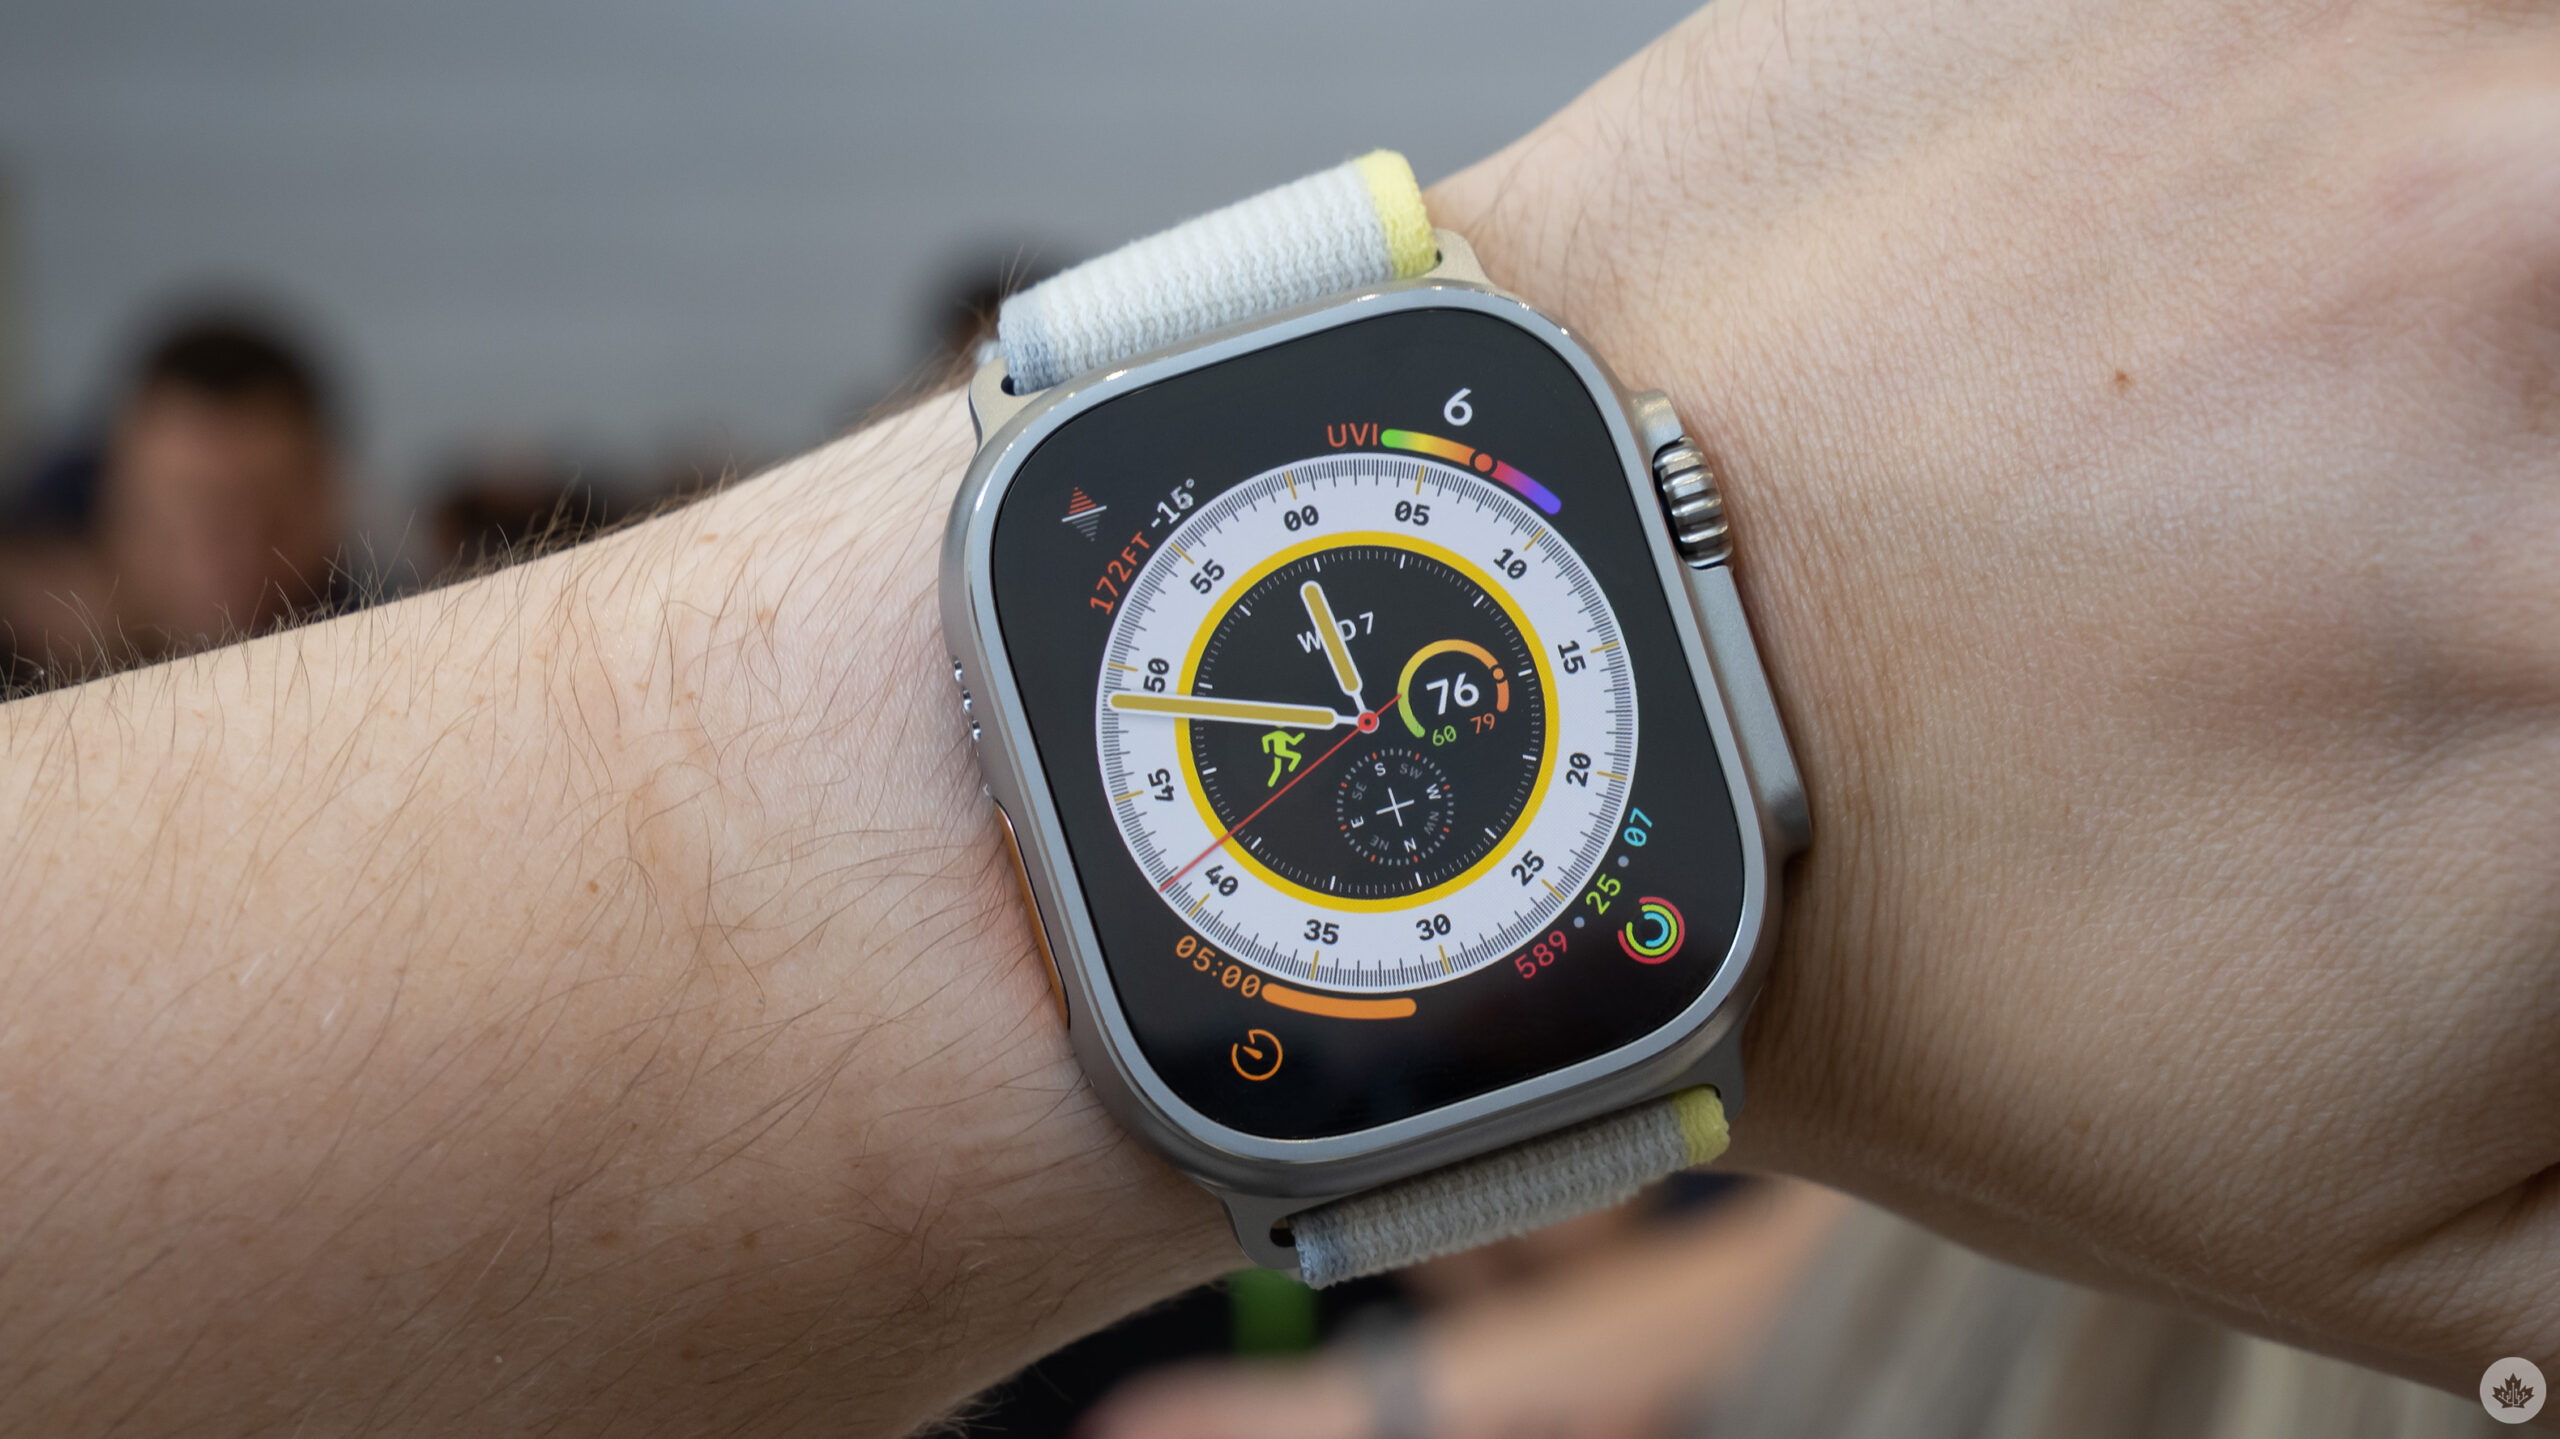 Apple Watch Ultra Hands-on: Big, bulky and capable